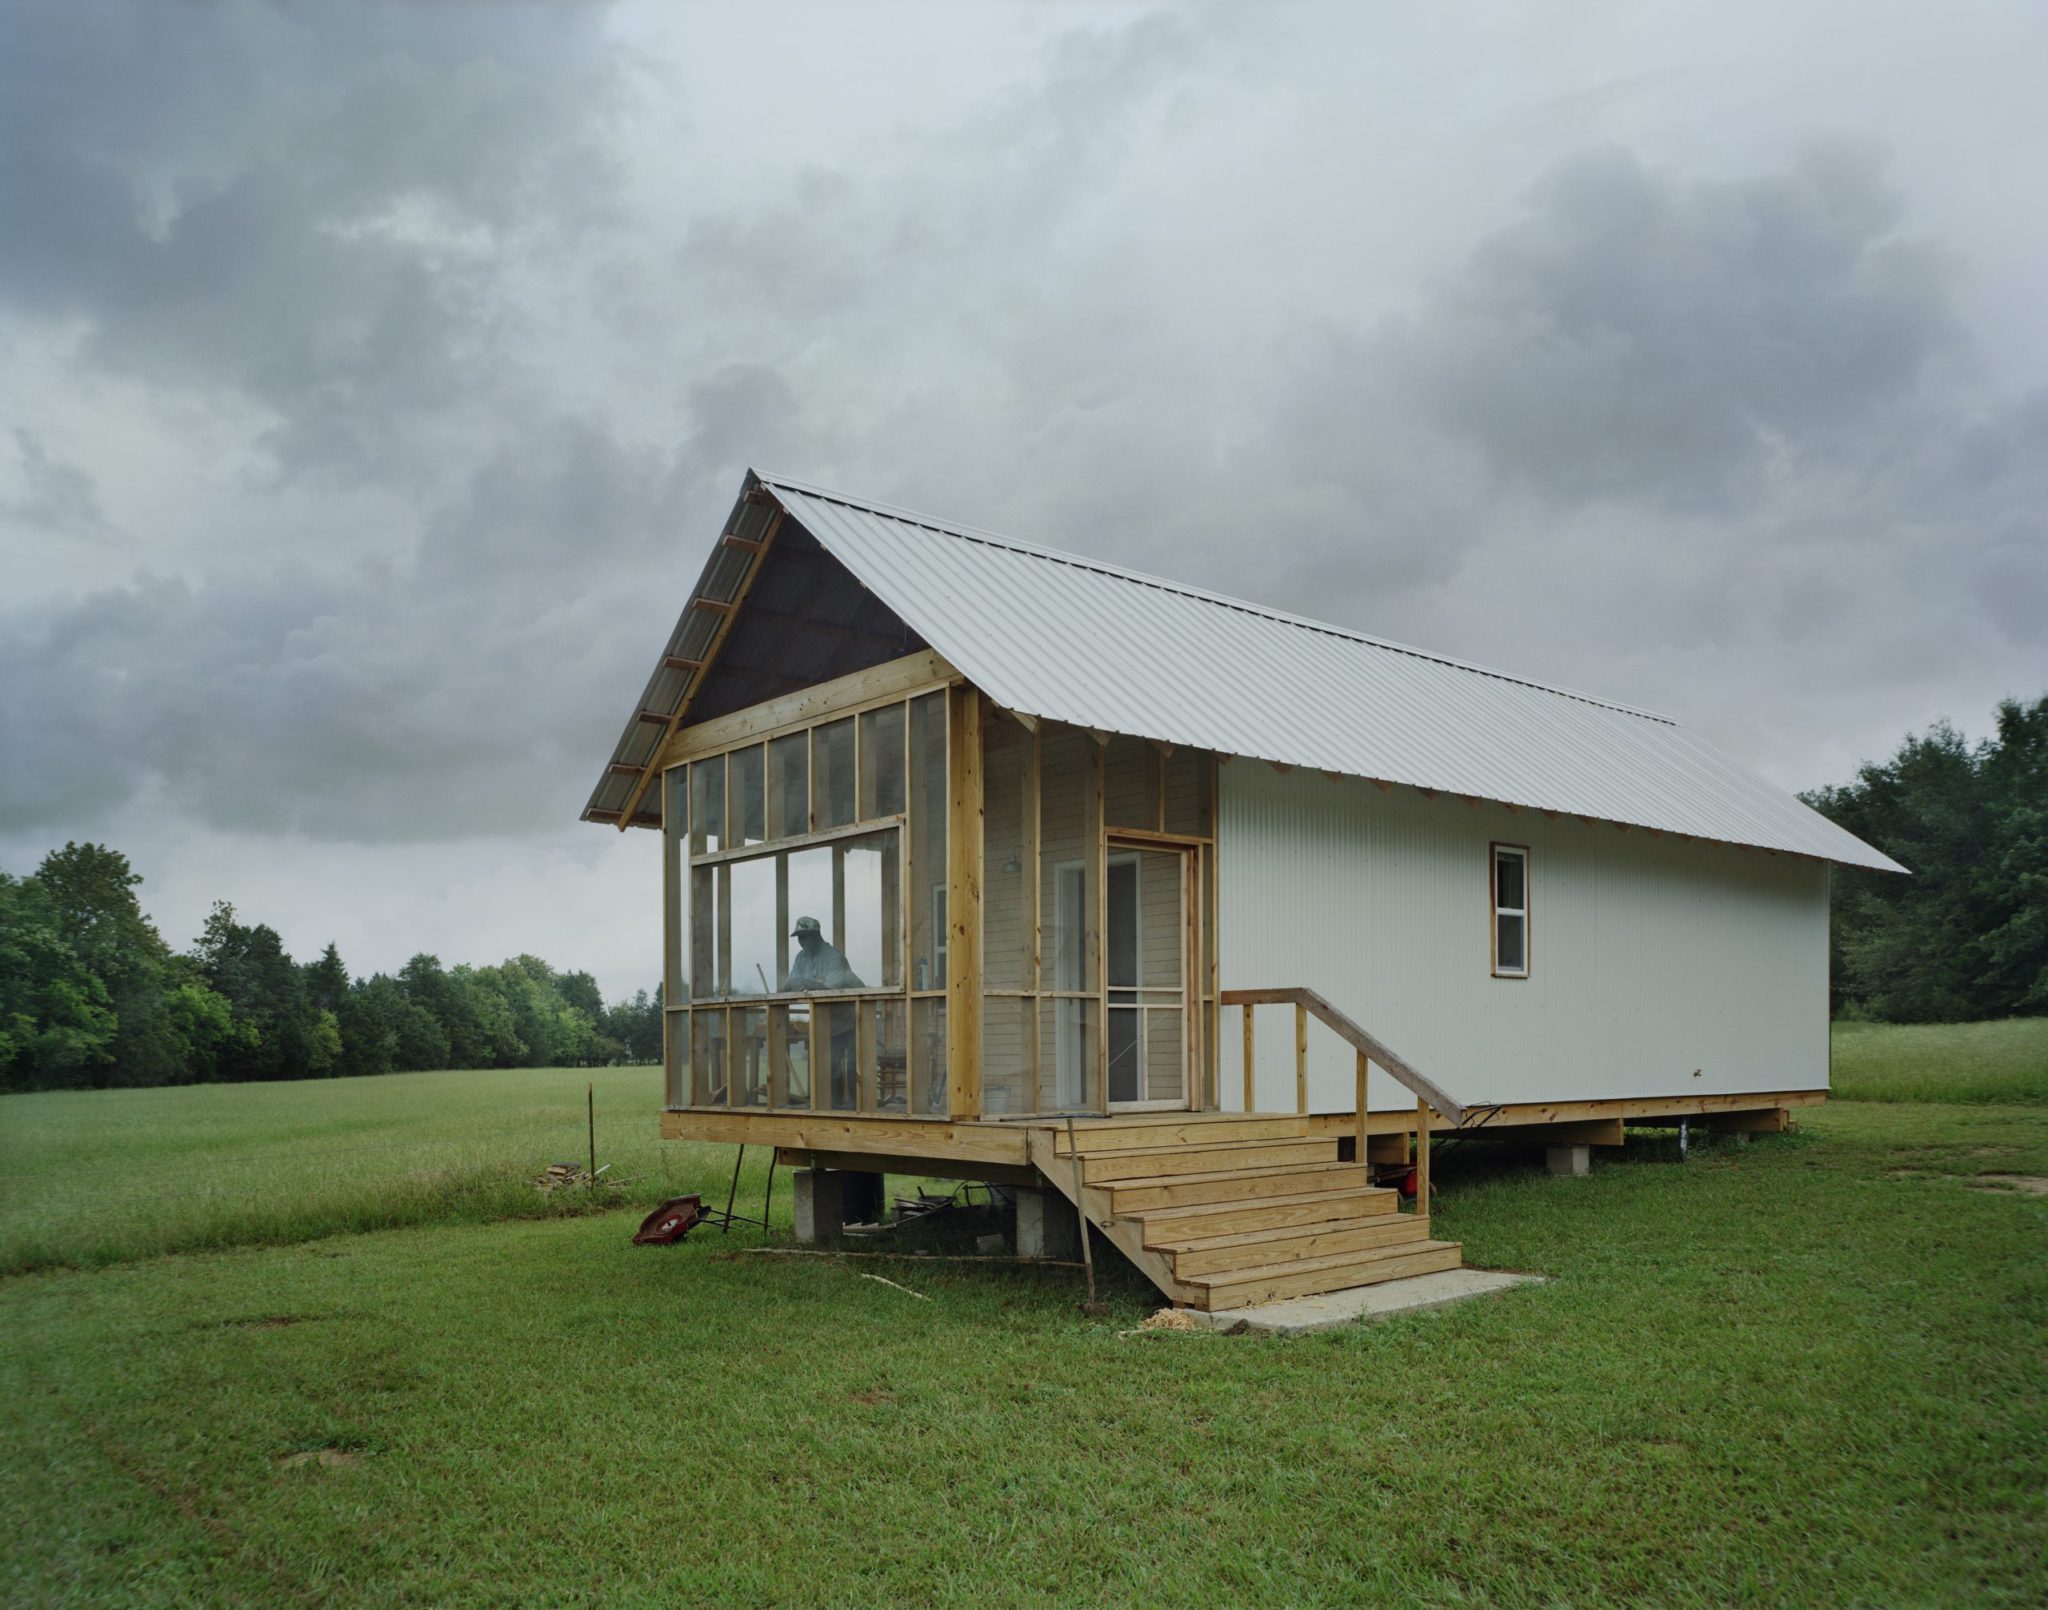 Andrew Freear and Rusty Smith, Rural Studio: The Challenges of Sustainable Rural Living